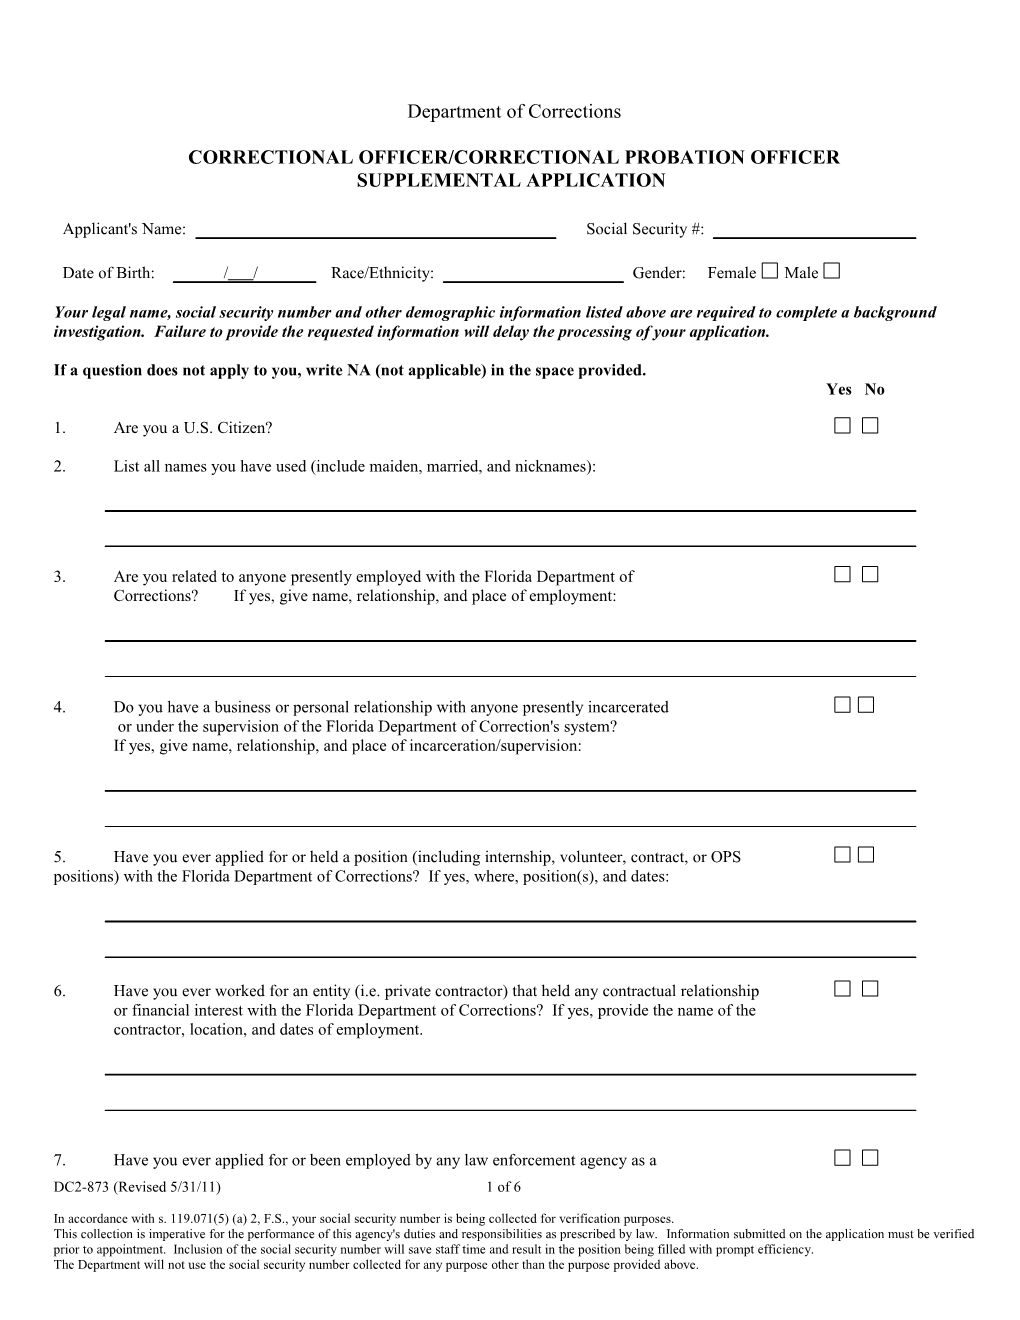 DC2-873 CO/CPO Supplemental Application (Revised 5/31/11)